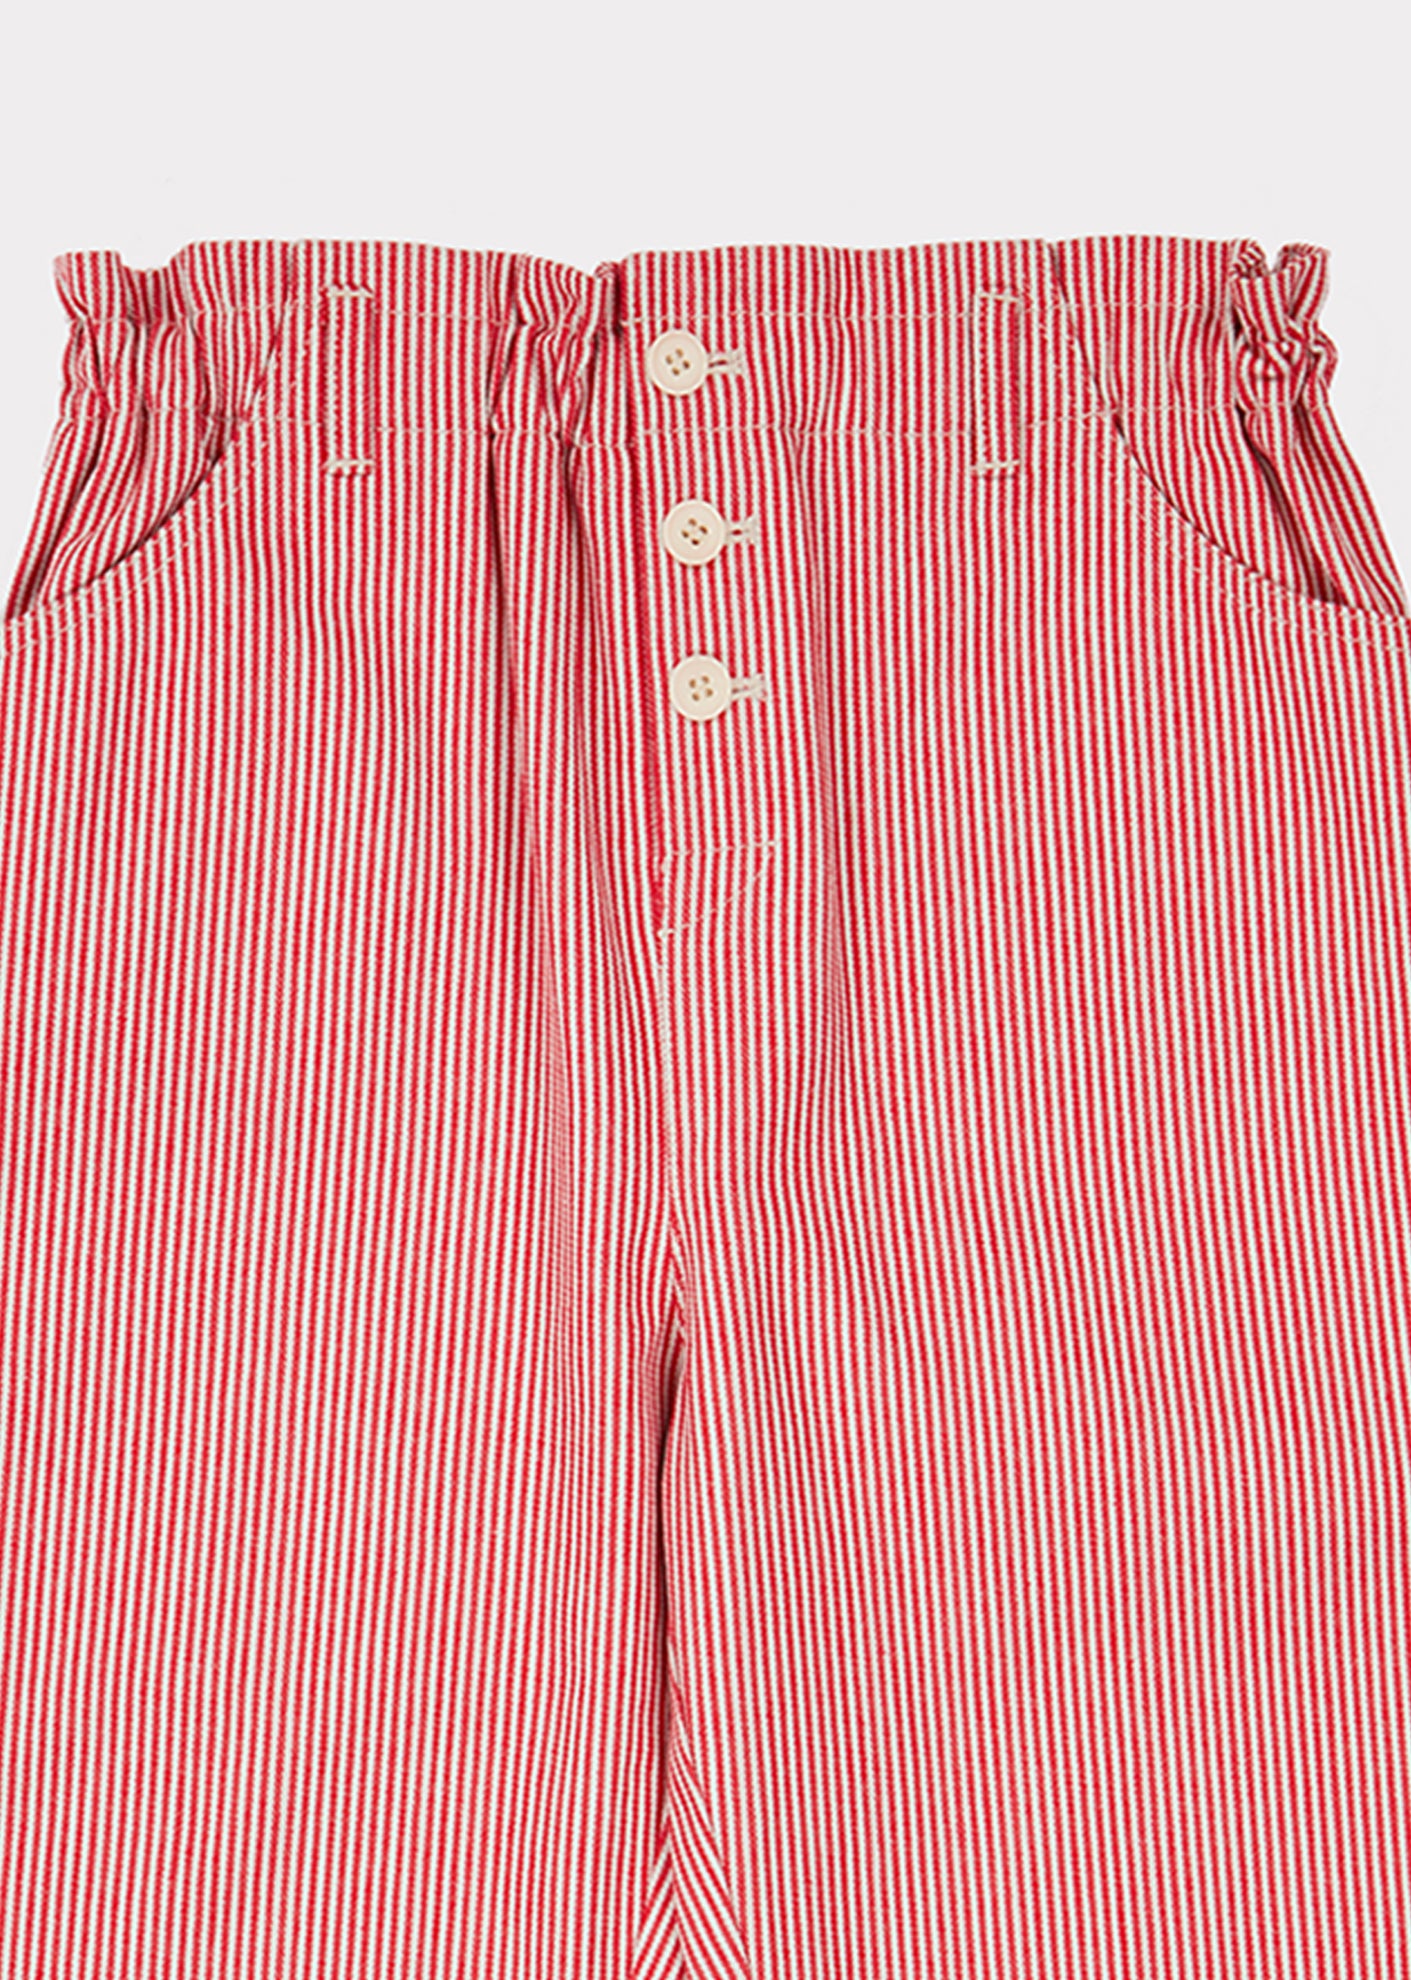 Girls Red Stripe Cotton Trousers